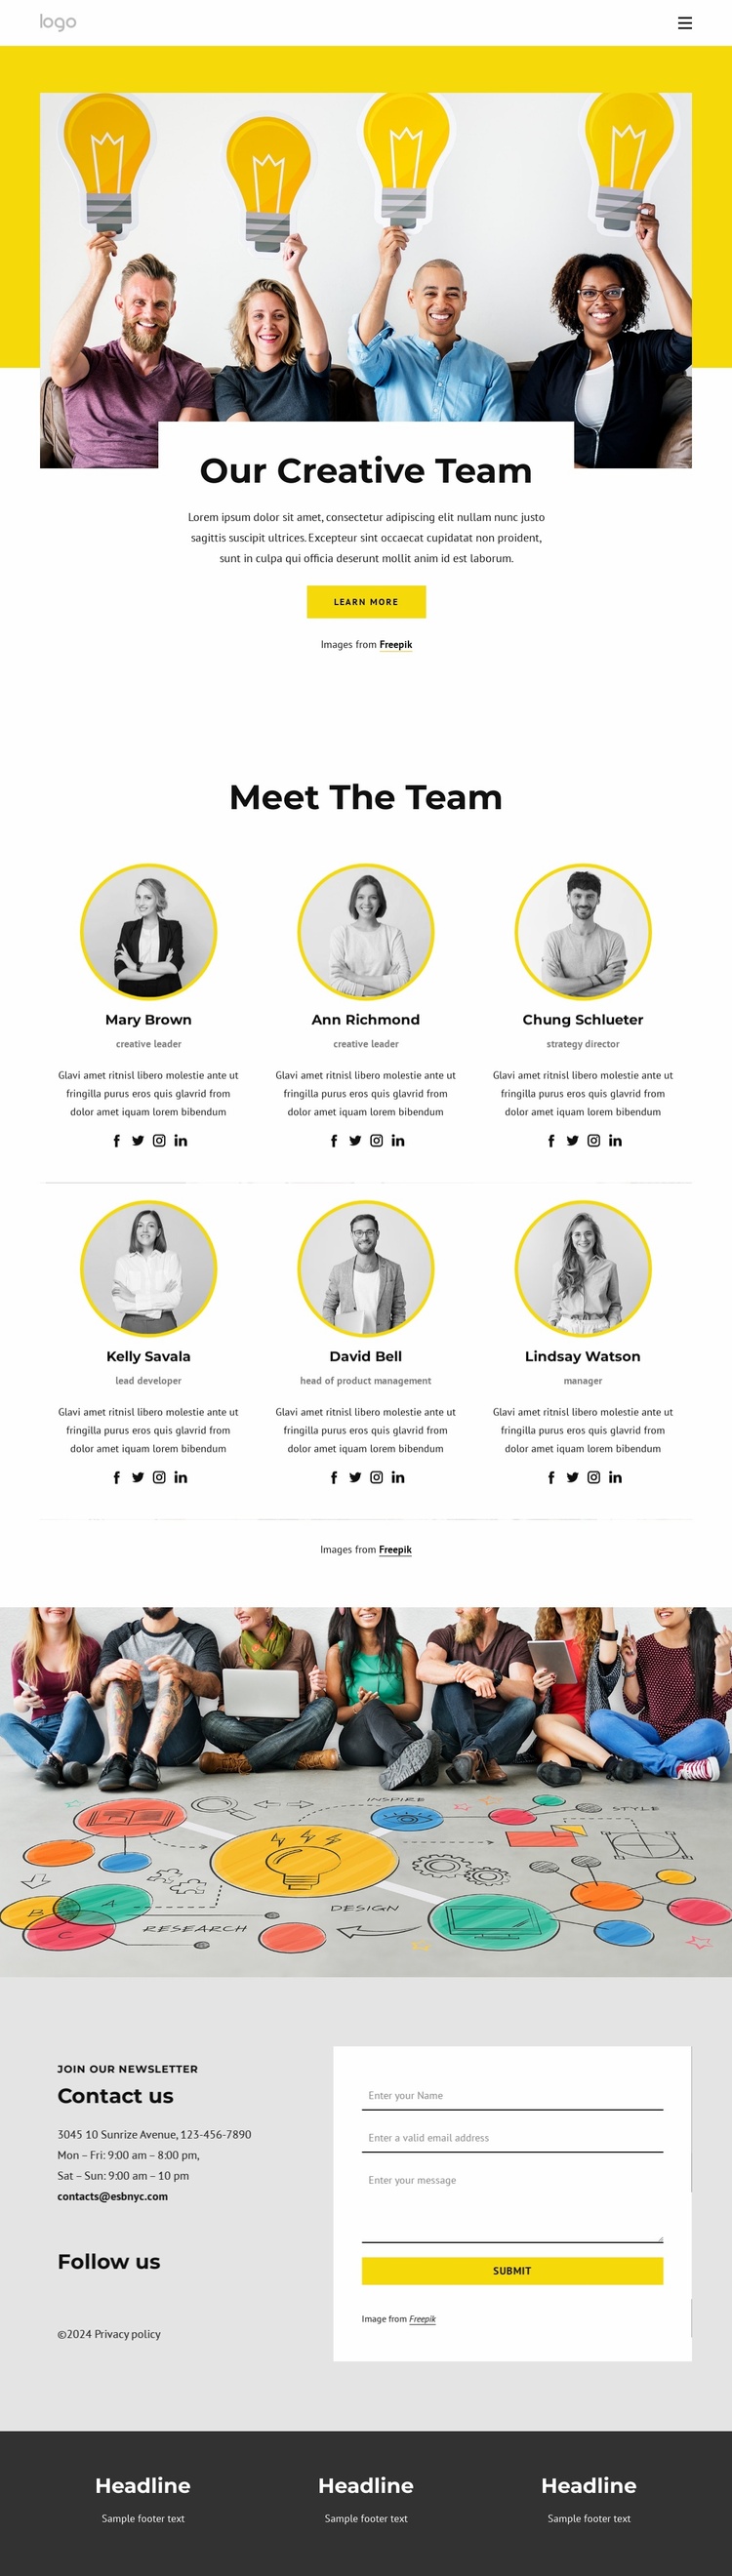 Meet our creative minds Landing Page